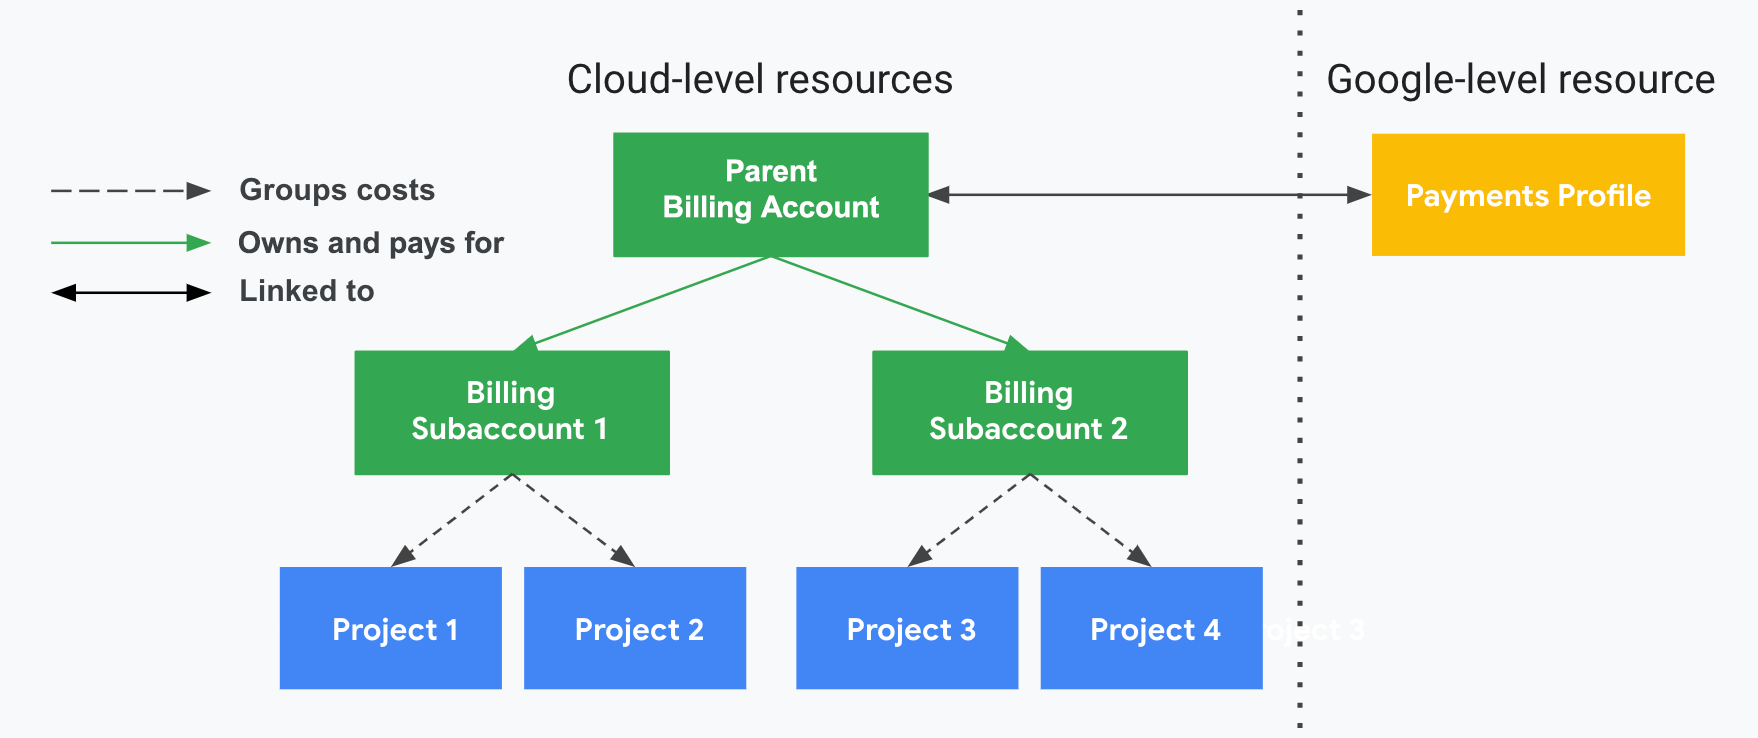 Describes how projects relate to Cloud Billing accounts,
         Cloud Billing subaccounts, and your Google payments
         profile. One side shows your Google Cloud-level resources
         (Cloud Billing account, subaccounts, and associated projects)
         and the other side, divided by a vertical dotted line, shows your
         Google-level resource (a Google payments profile). Project usage
         costs are grouped and subtotalled by the associated
         Cloud Billing subaccounts. Subaccounts are paid
         for by the reseller's parent Cloud Billing account, which is
         linked the reseller's Google payments profile.